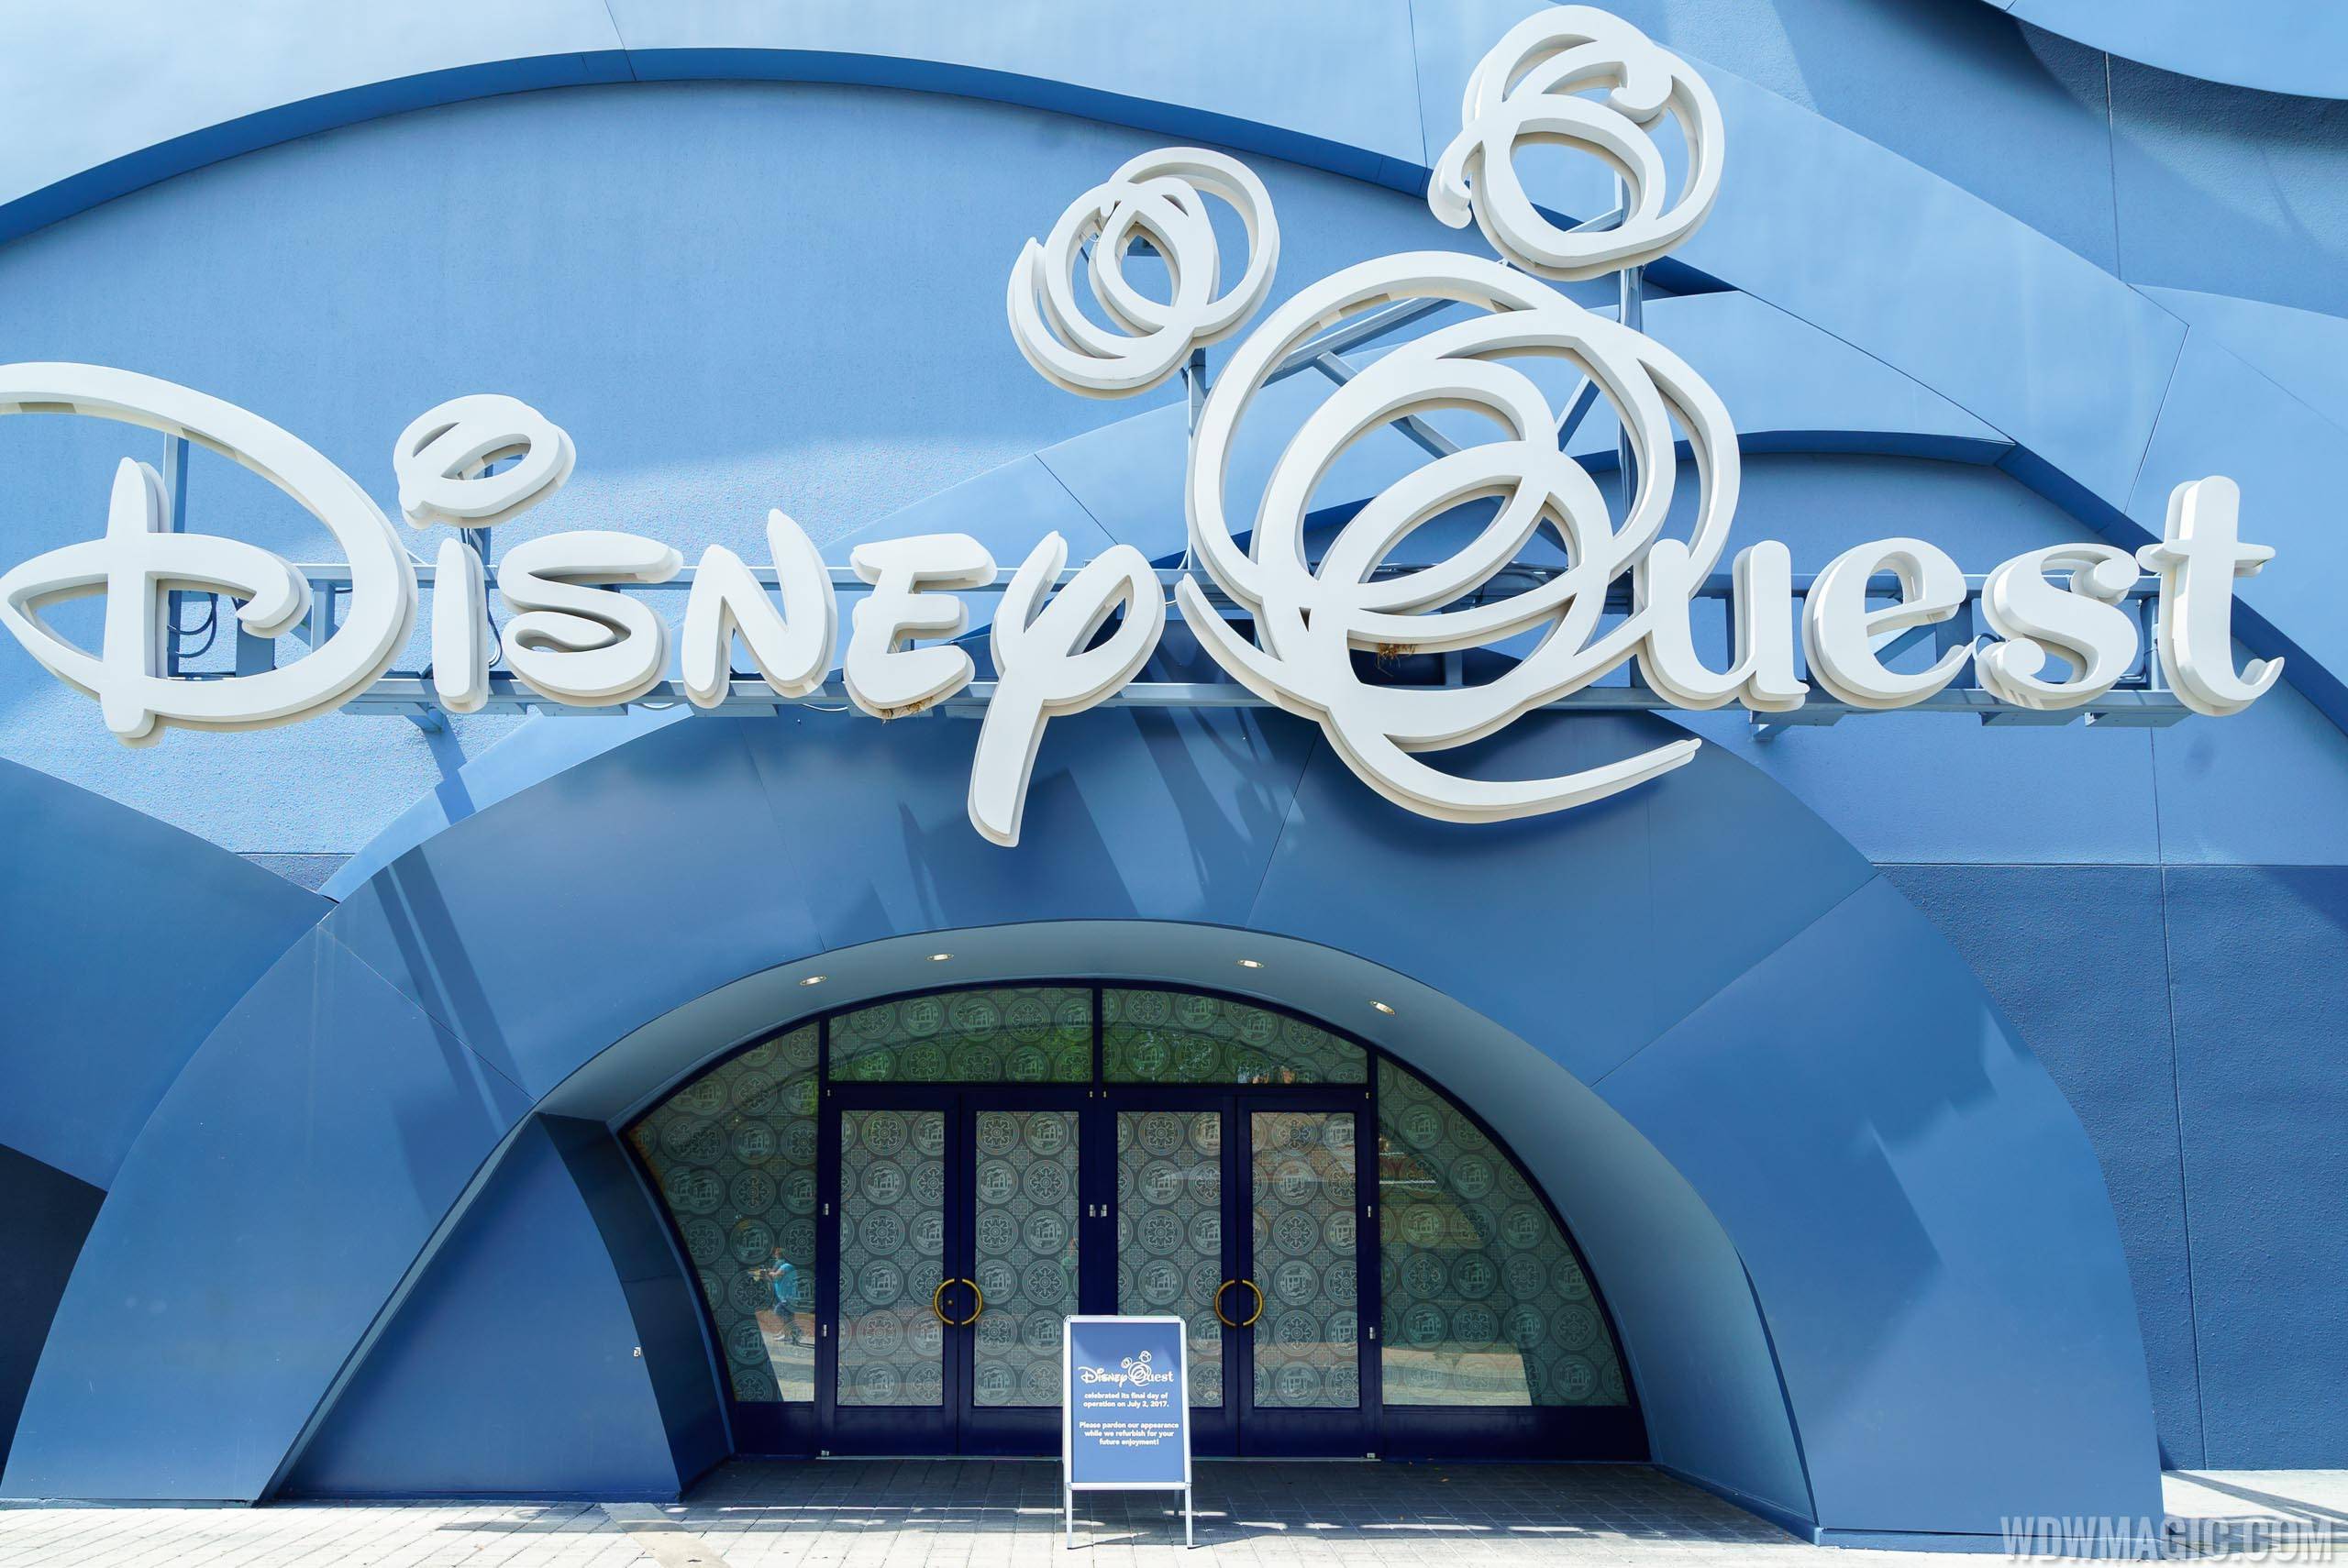 Permits filed for demolition of DisneyQuest